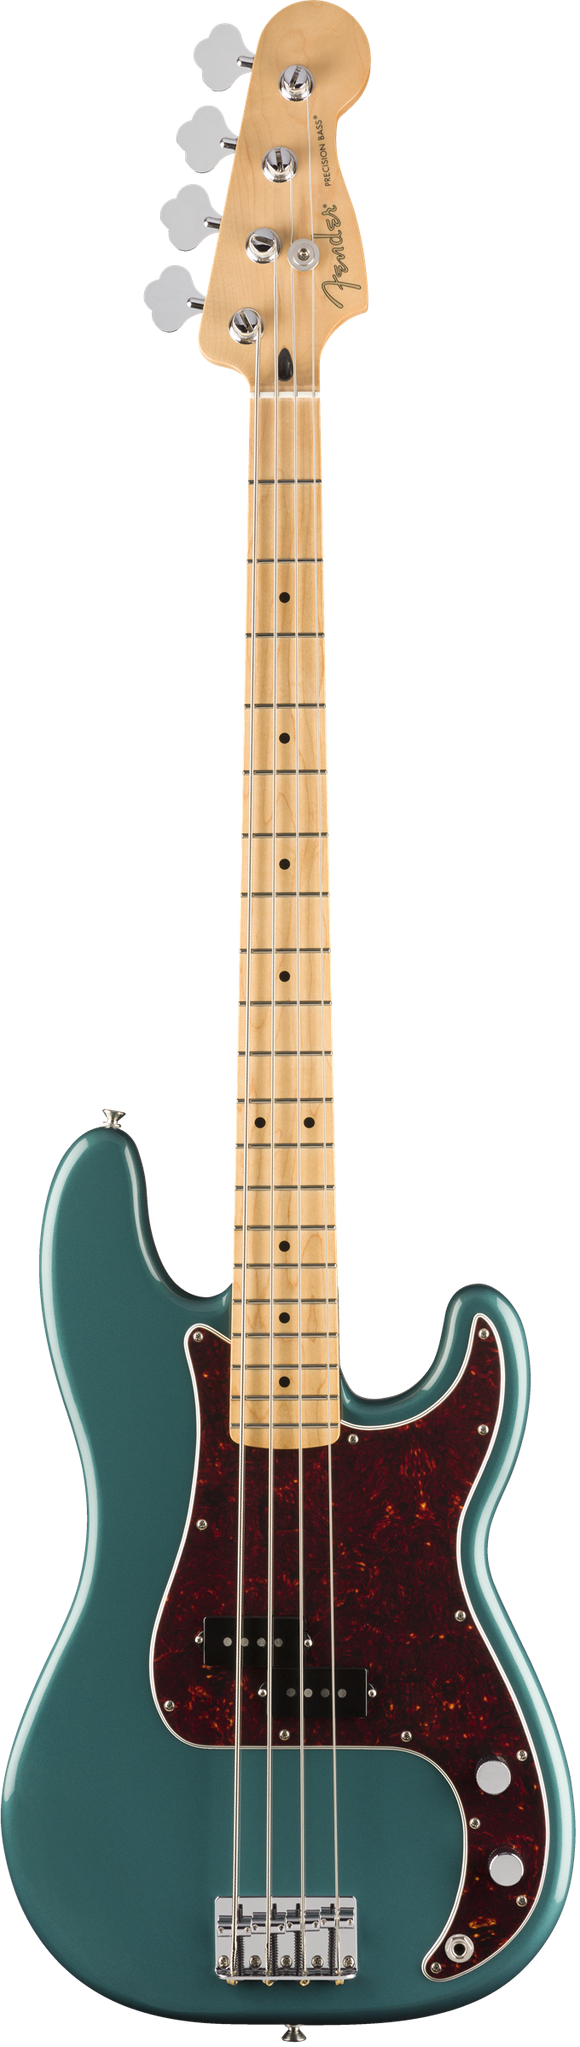 Fender Limited Edition Player Precision Bass, Maple Fingerboard, Ocean Turquoise